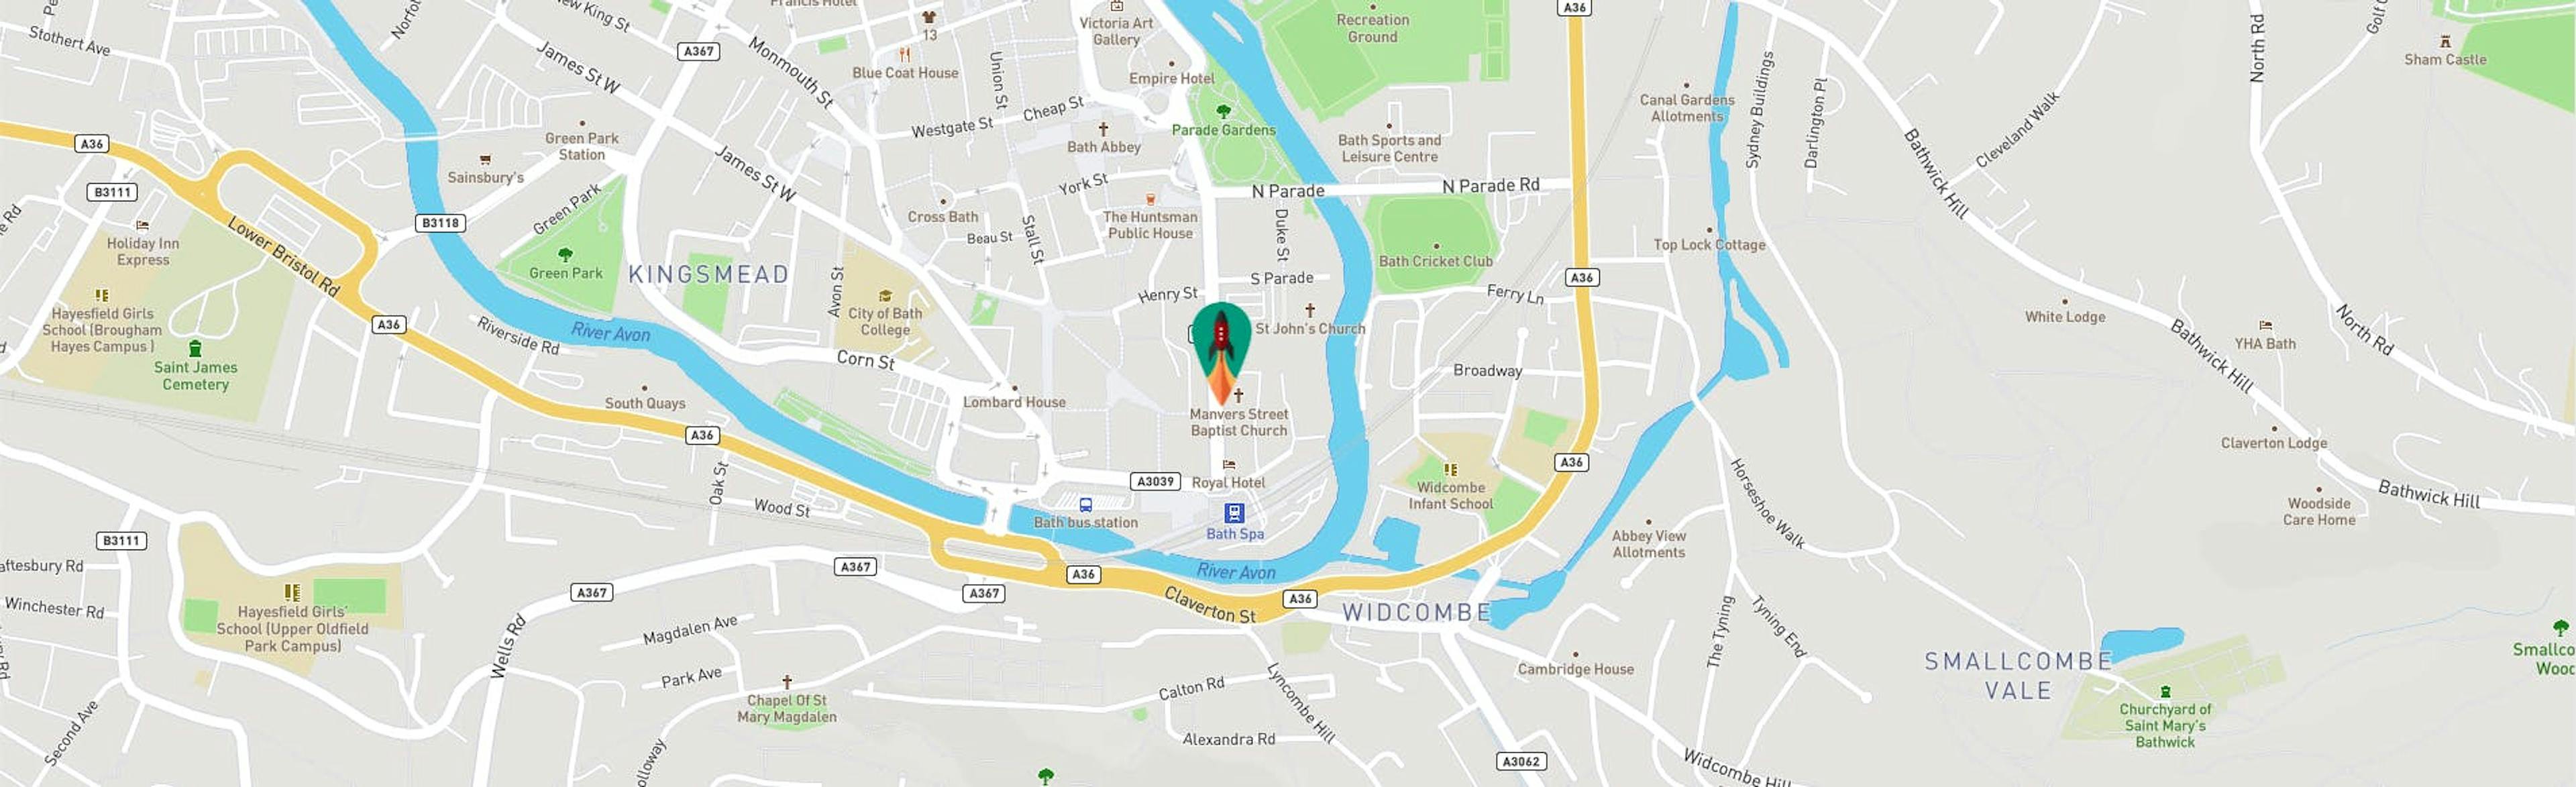 Google maps image that pin points the location of the Rocketmakers HQ in Bath.